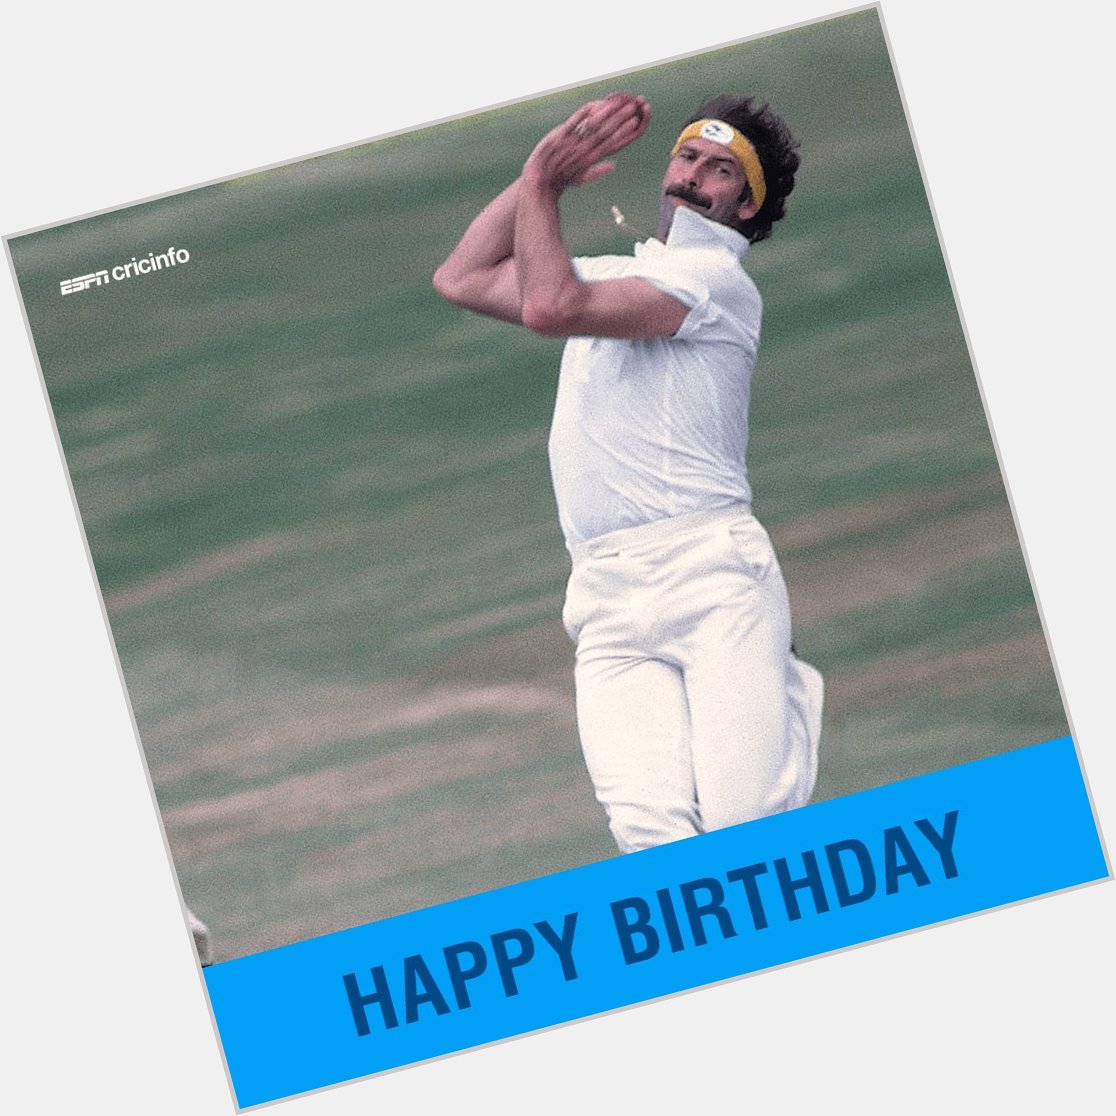  Happy birthday to Dennis Lillee, one of the greatest fast bowlers of all time! 

 